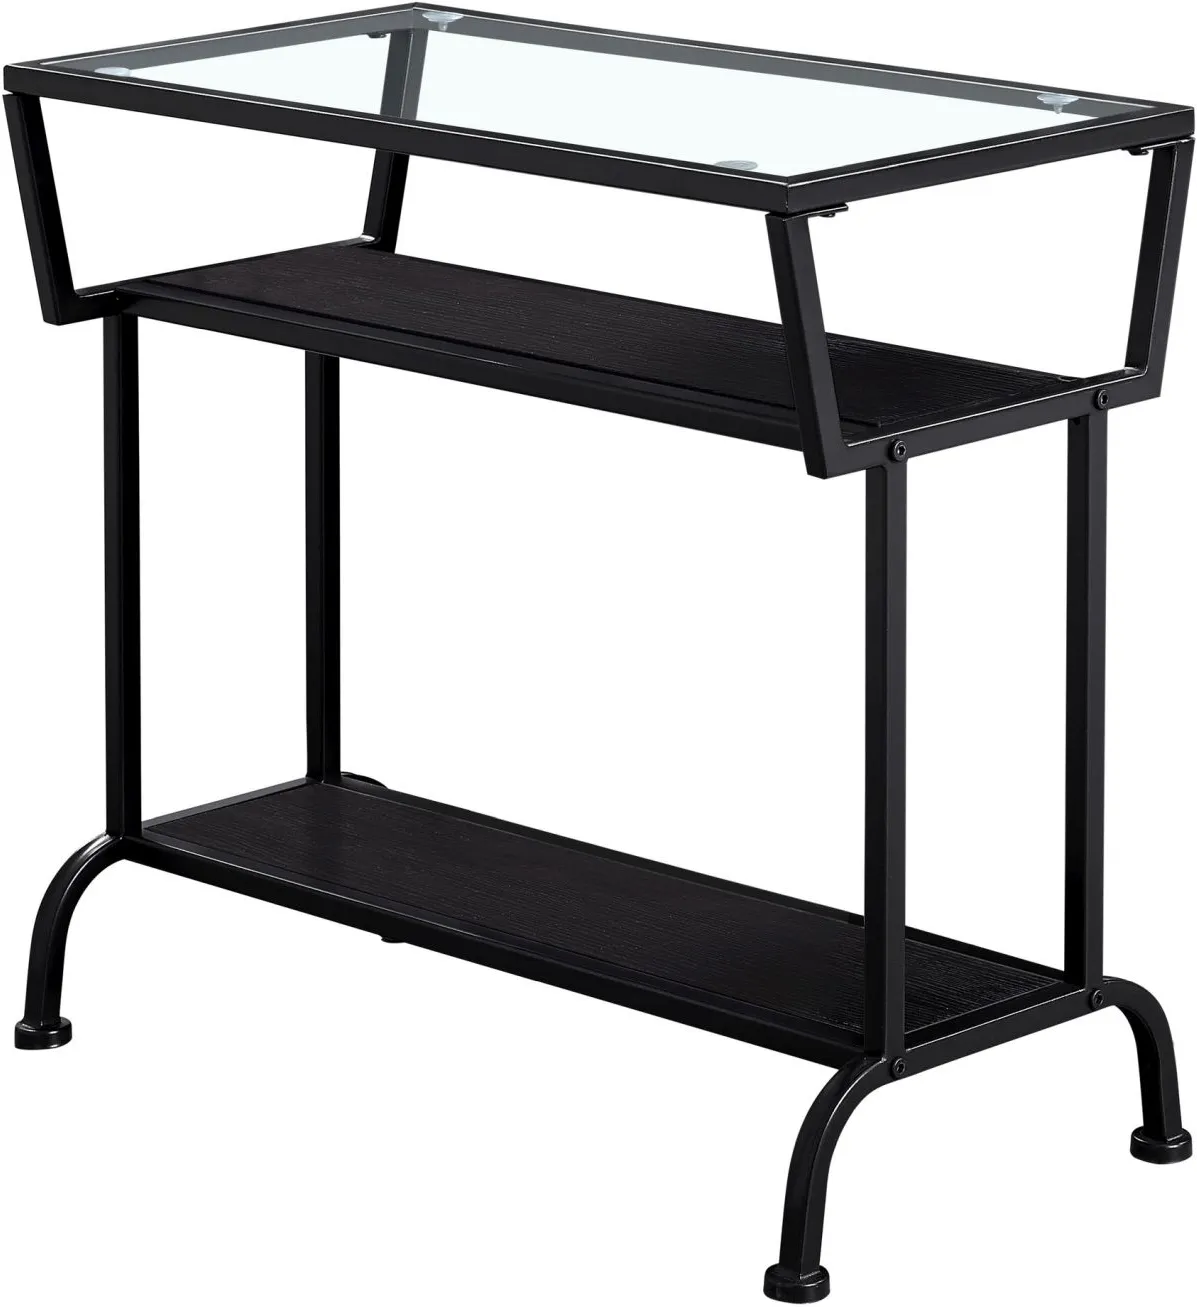 Accent Table, Side, End, Narrow, Small, 2 Tier, Living Room, Bedroom, Metal, Tempered Glass, Laminate, Brown, Black, Contemporary, Modern